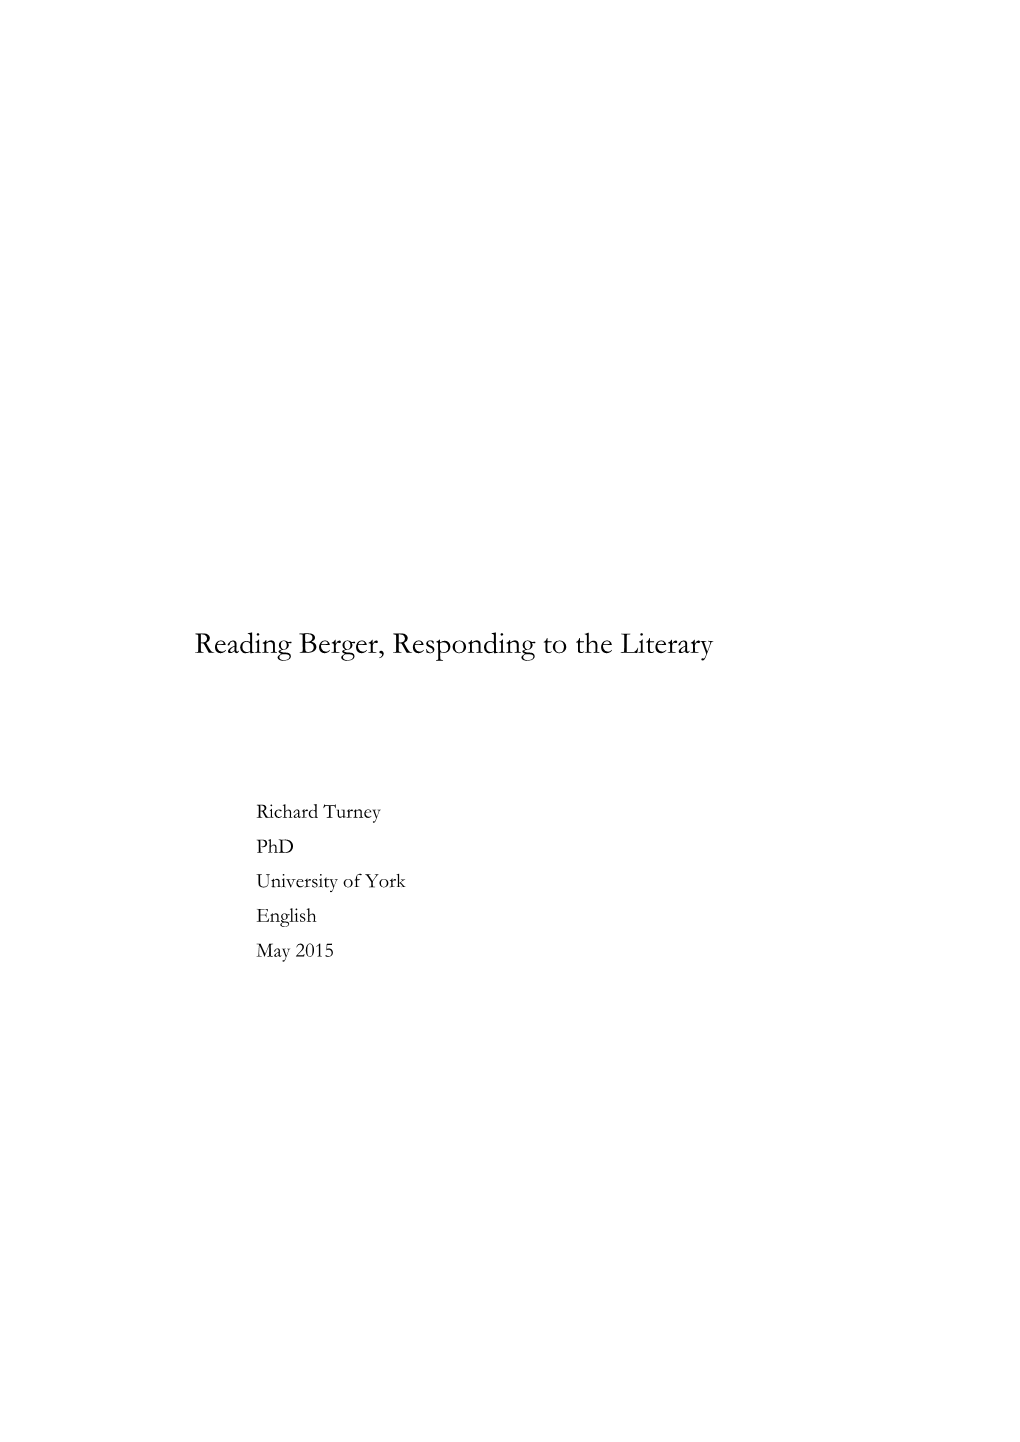 Reading Berger, Responding to the Literary